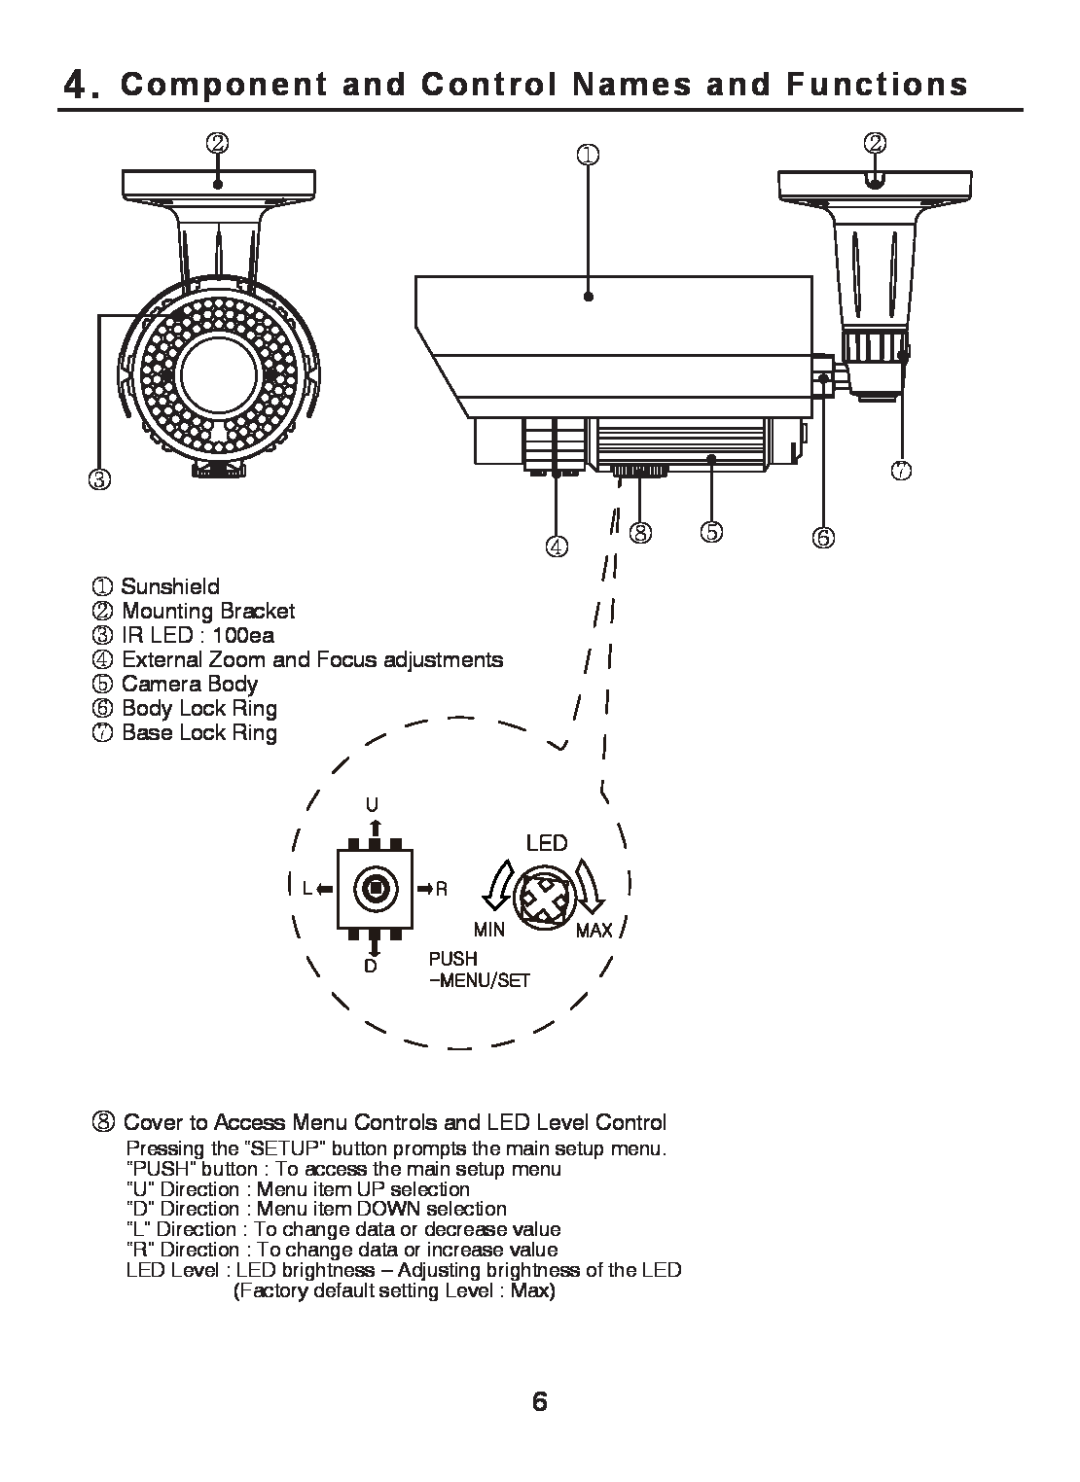 EverFocus EZ-PLATECAM2 operation manual Component and Control Names and Functions, ④ ⑧ ⑤⑥ 